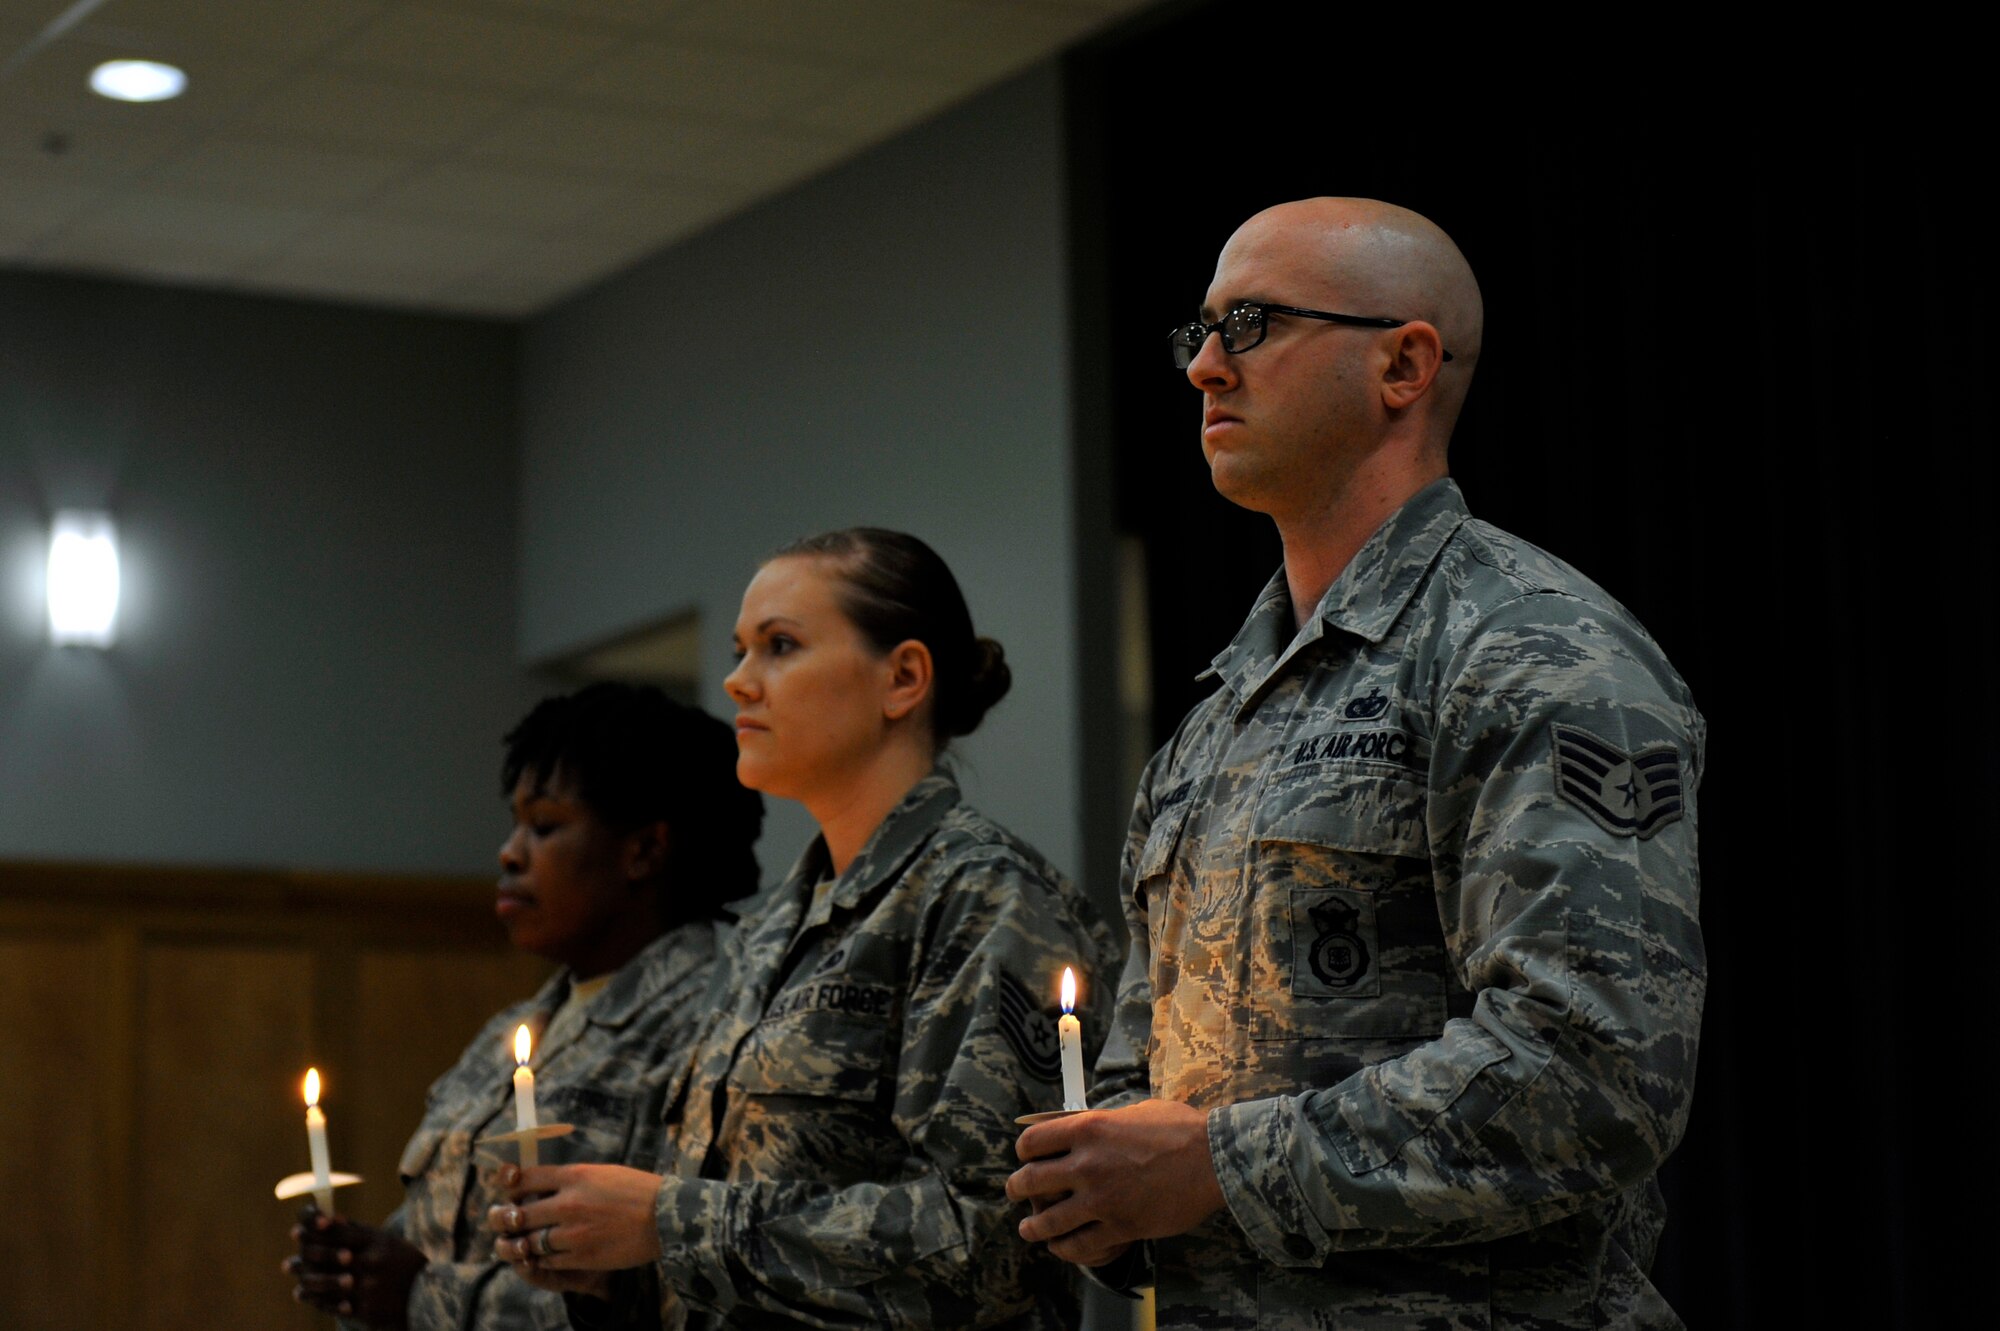 U.S. Air Force Airmen participate in the candle lighting portion of the Holocaust Remembrance Ceremony May 5, 2016, at Little Rock Air Force Base.  Lighting a candle signifies passing the light of memory and hope from one person to another. (U.S. Air Force photo by Kevin E. Sommer Giron) 